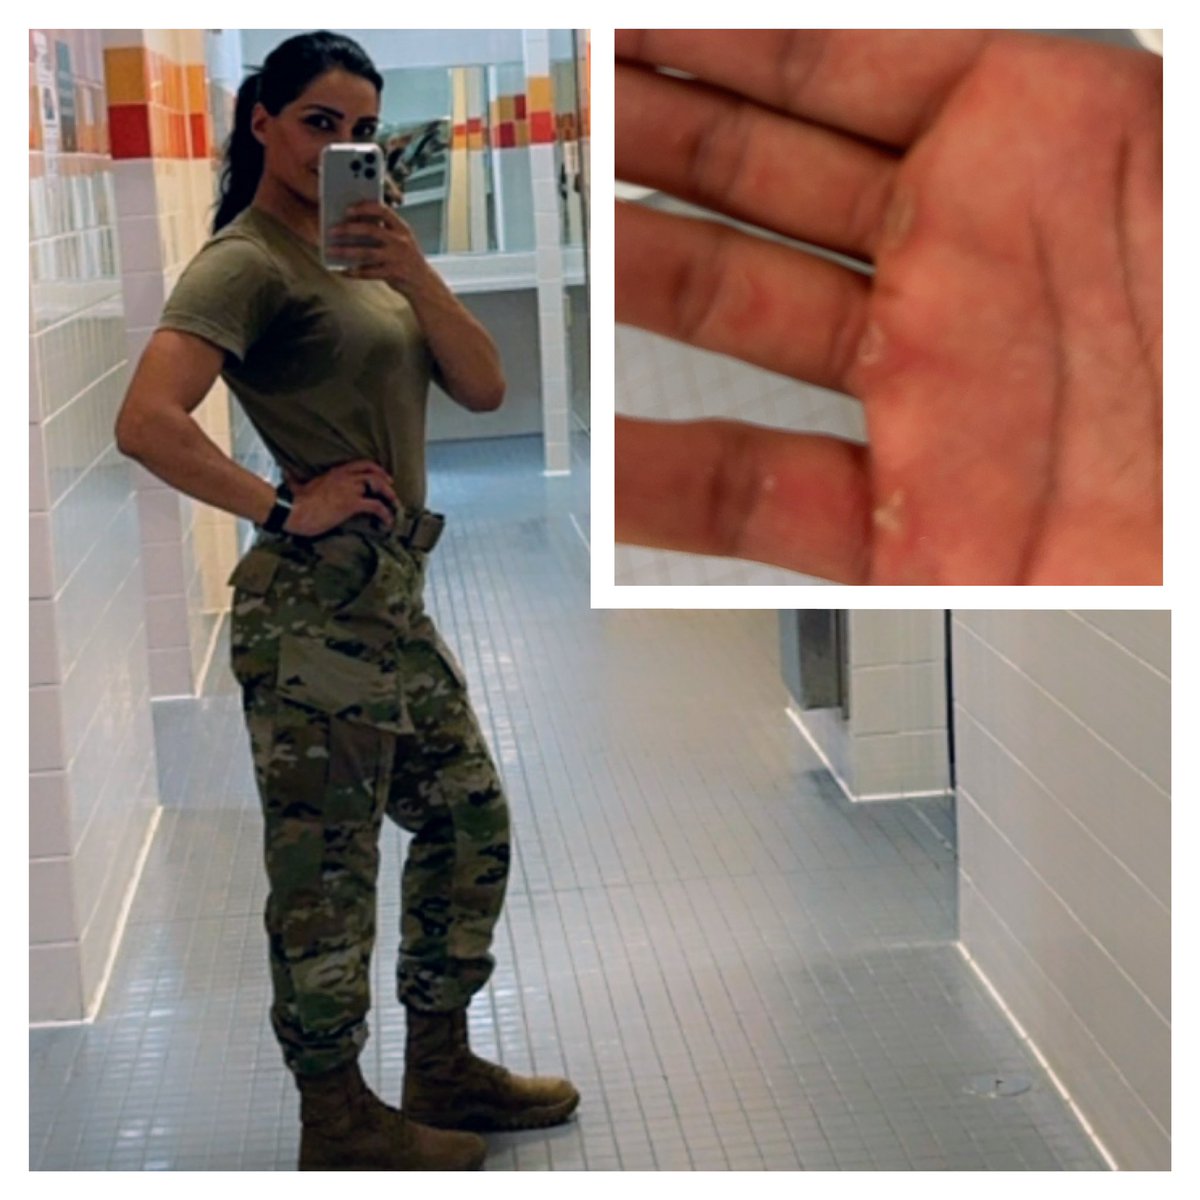 💦 Extra sweat today! 🏋️‍♂️ Hands are feeling the grind, but every rep counts! Keep showing up, champions! 🌟 No excuses. #PushTheLimits #NoExcuses #getafterit #ArmyStrong